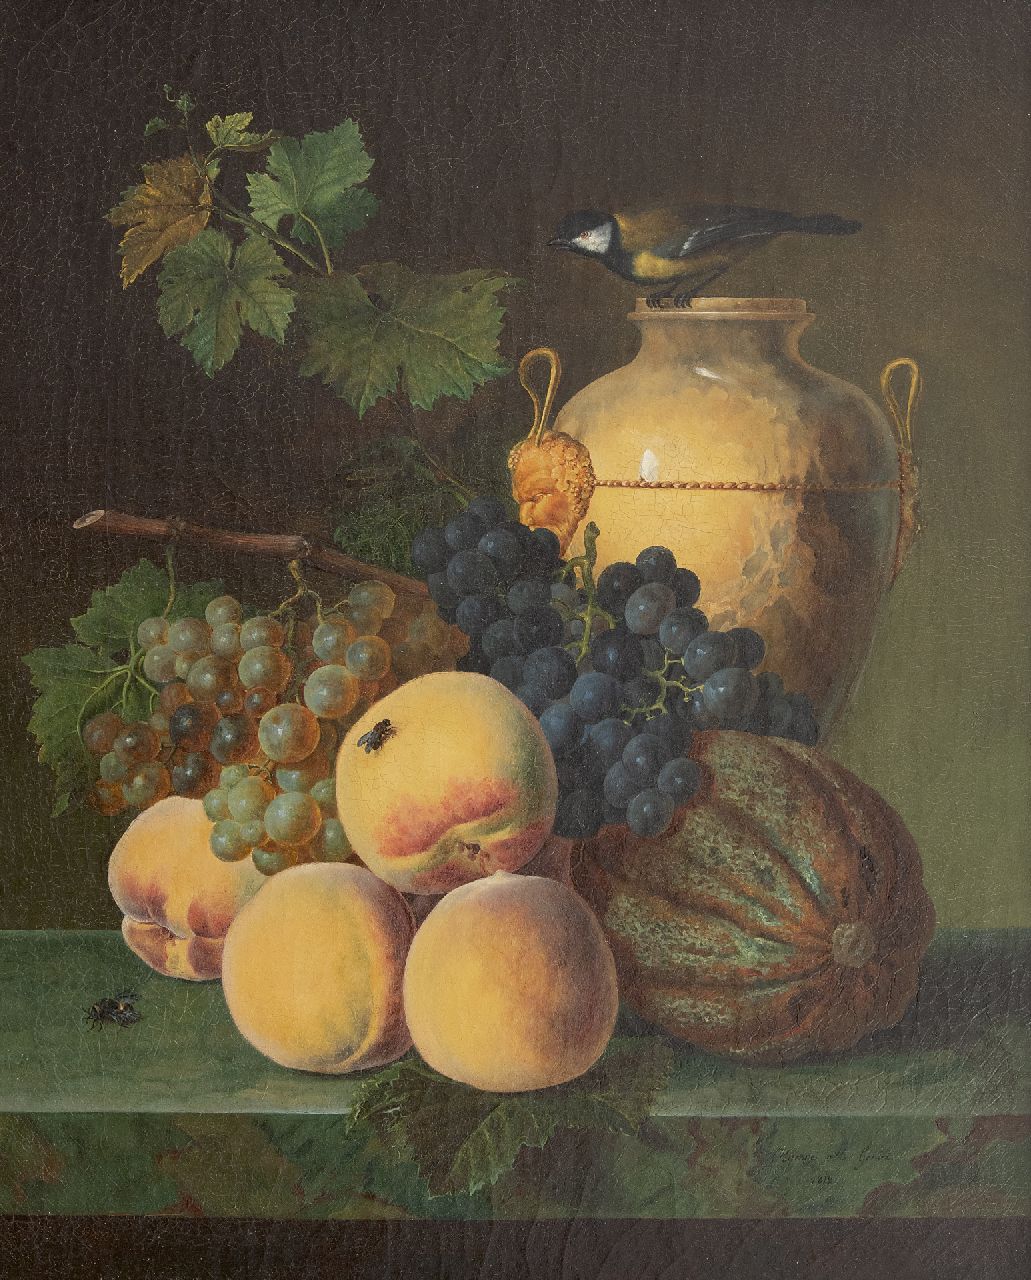 Génin O.M.  | Olympe Mouette Génin | Paintings offered for sale | A still life with peaches, an amphora and a bird, oil on canvas 49.0 x 39.9 cm, signed l.r. and dated 1818